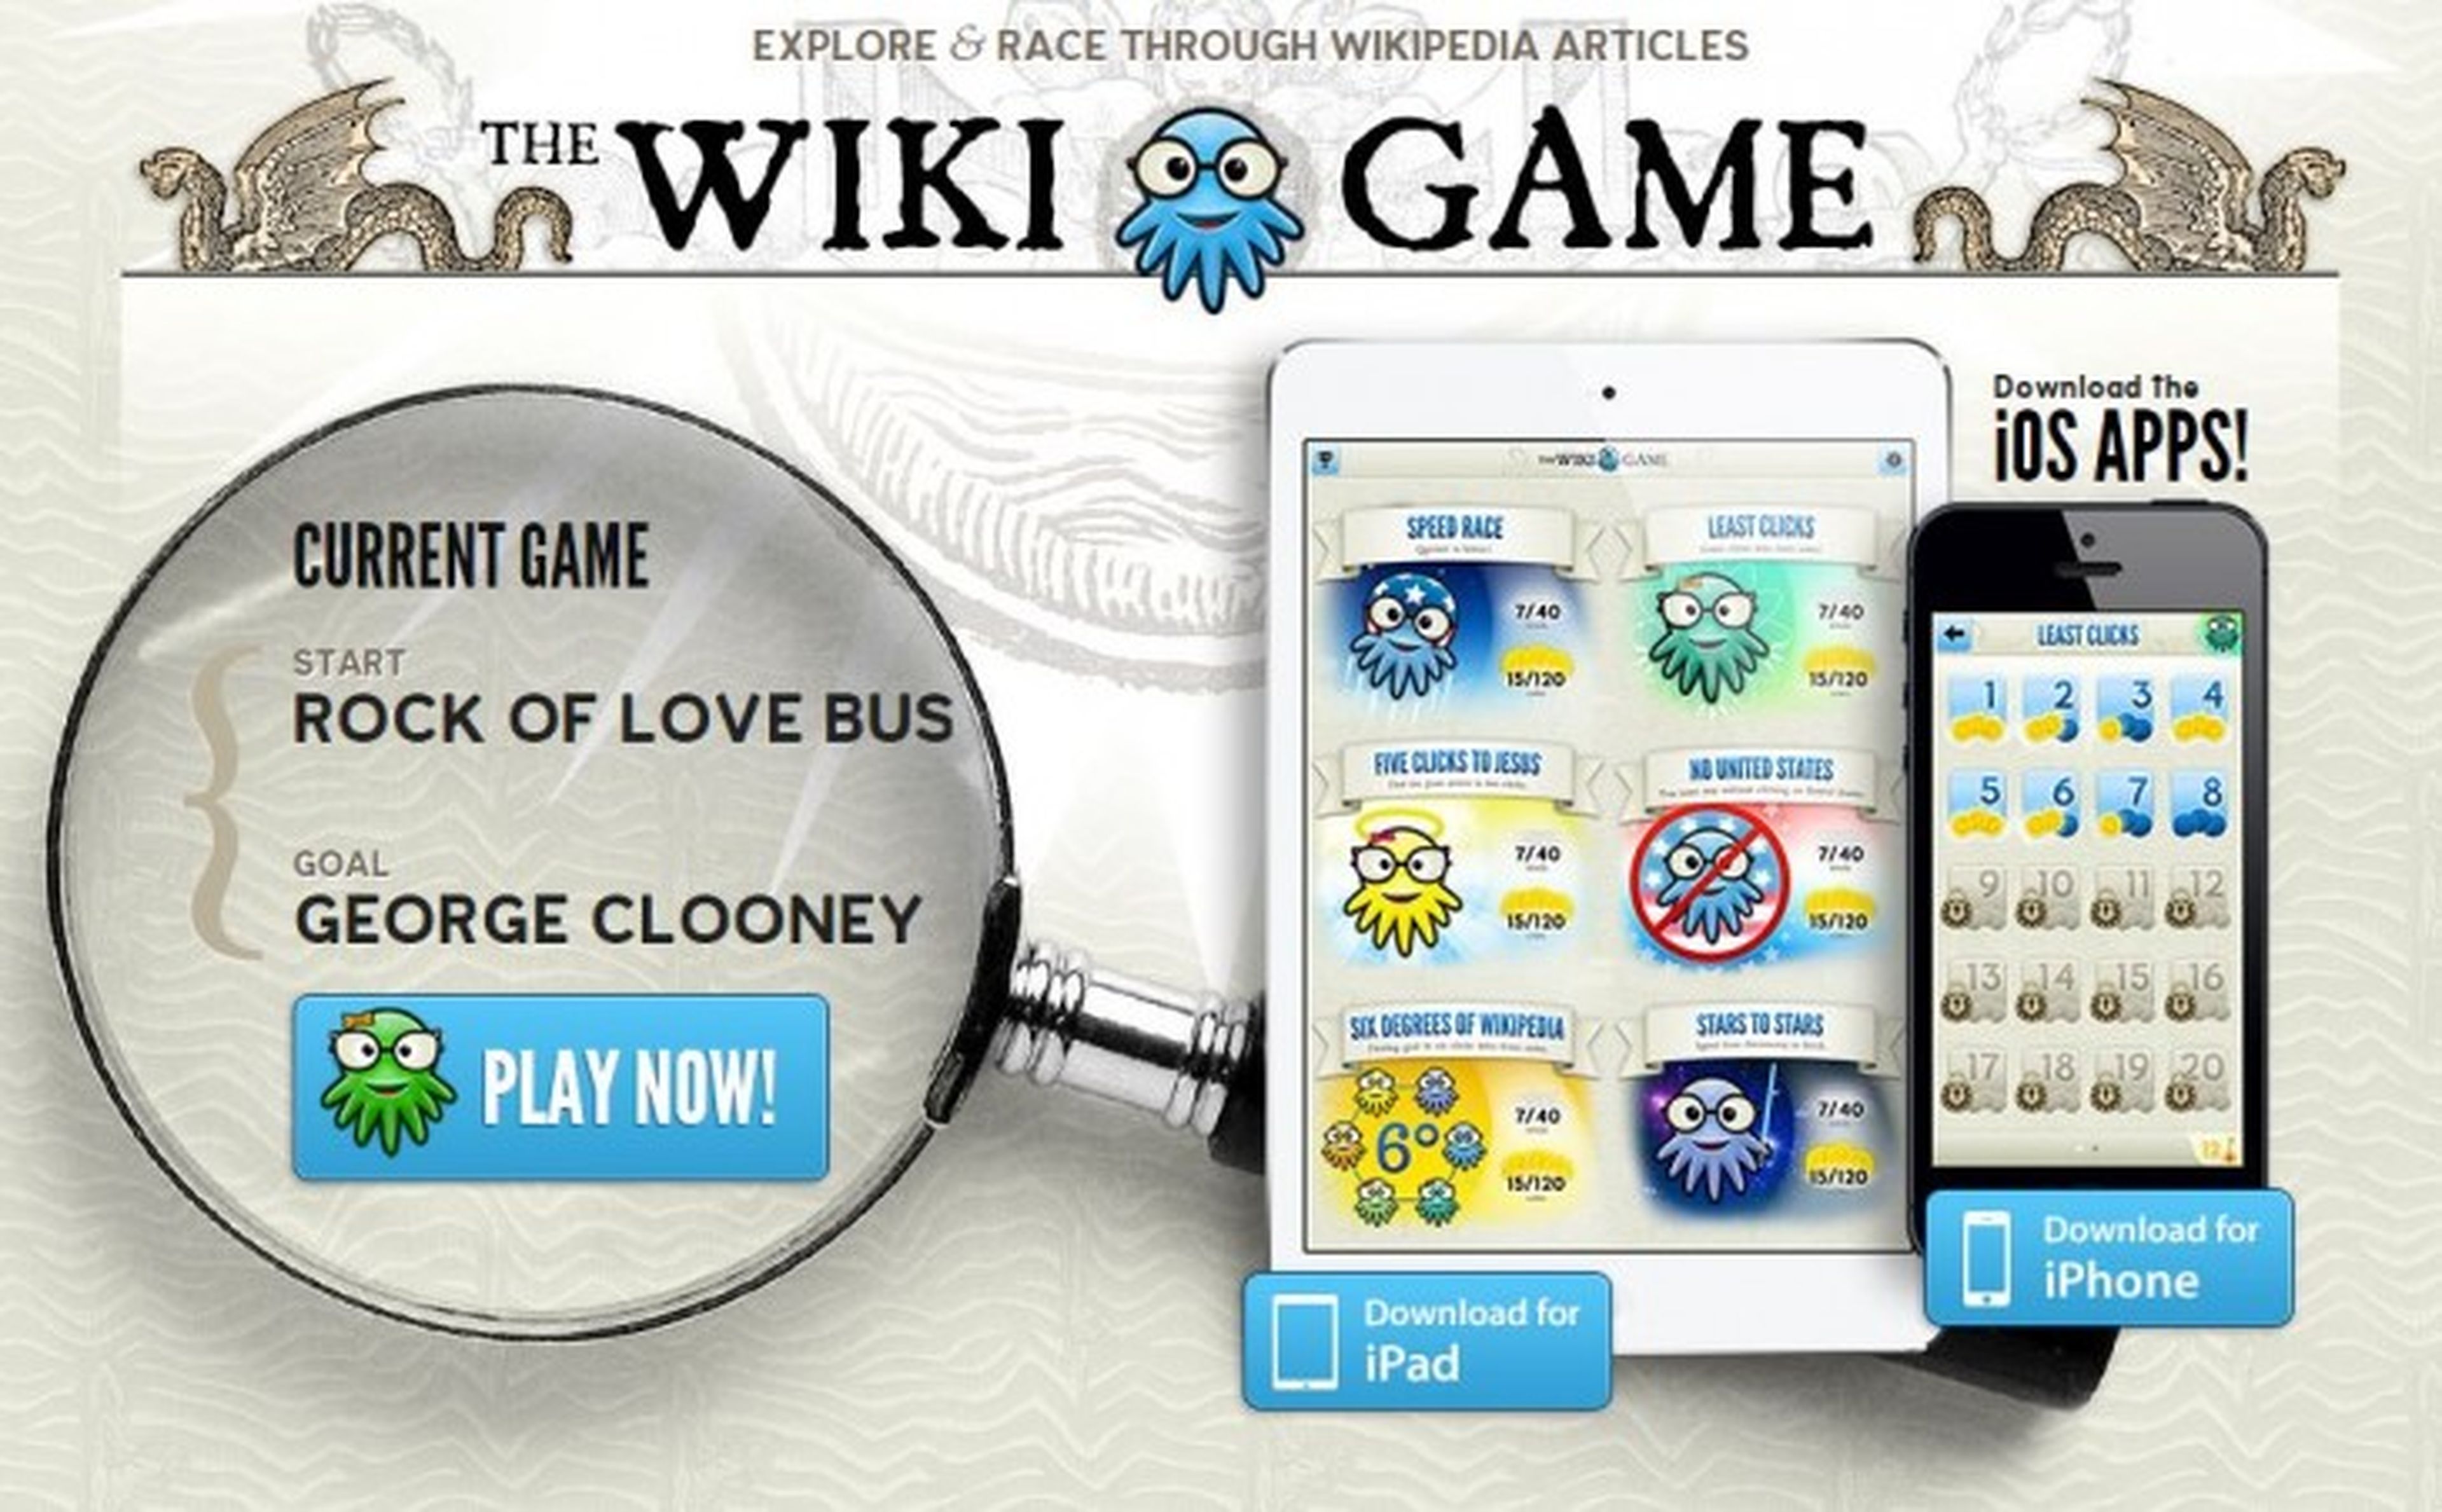 The Wiki Game